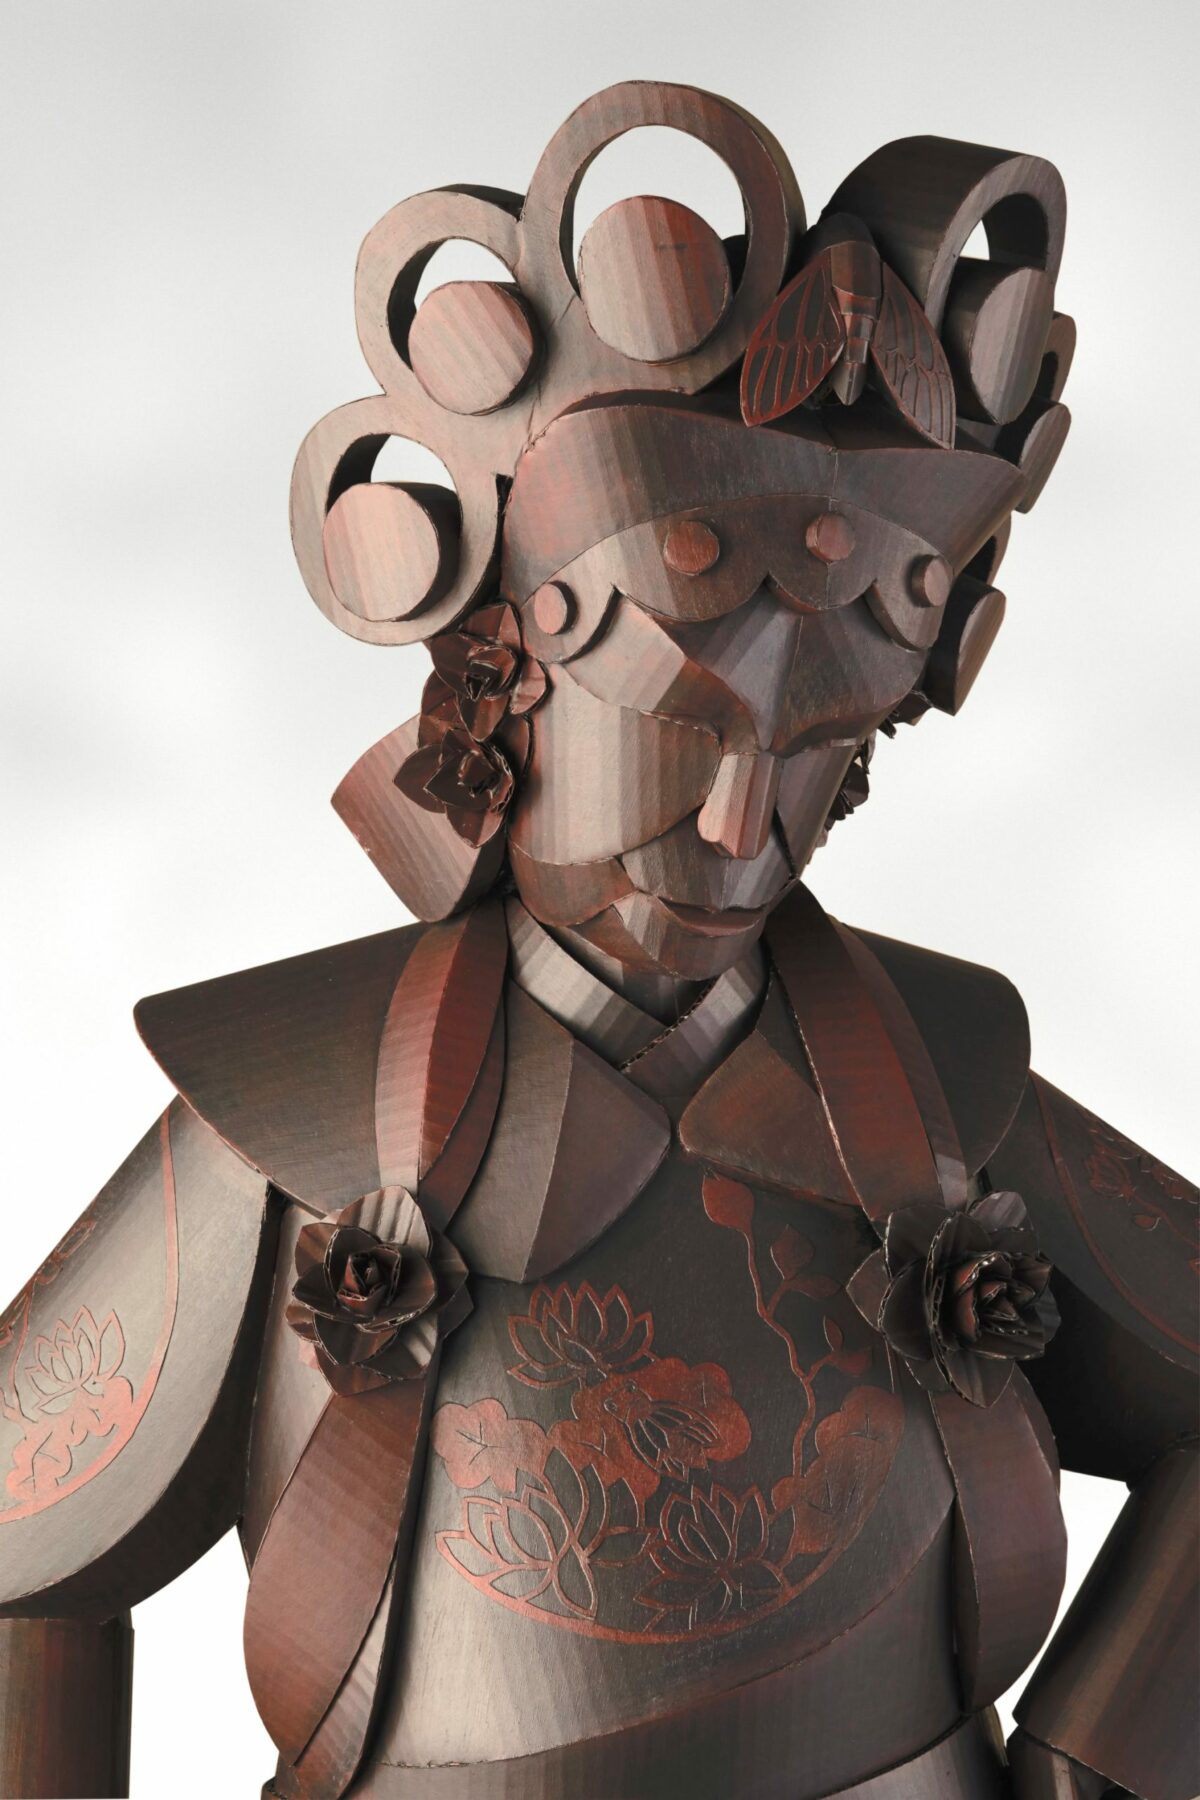 New Figurative Sculptures Made Of Cardboard By Warren King (8)